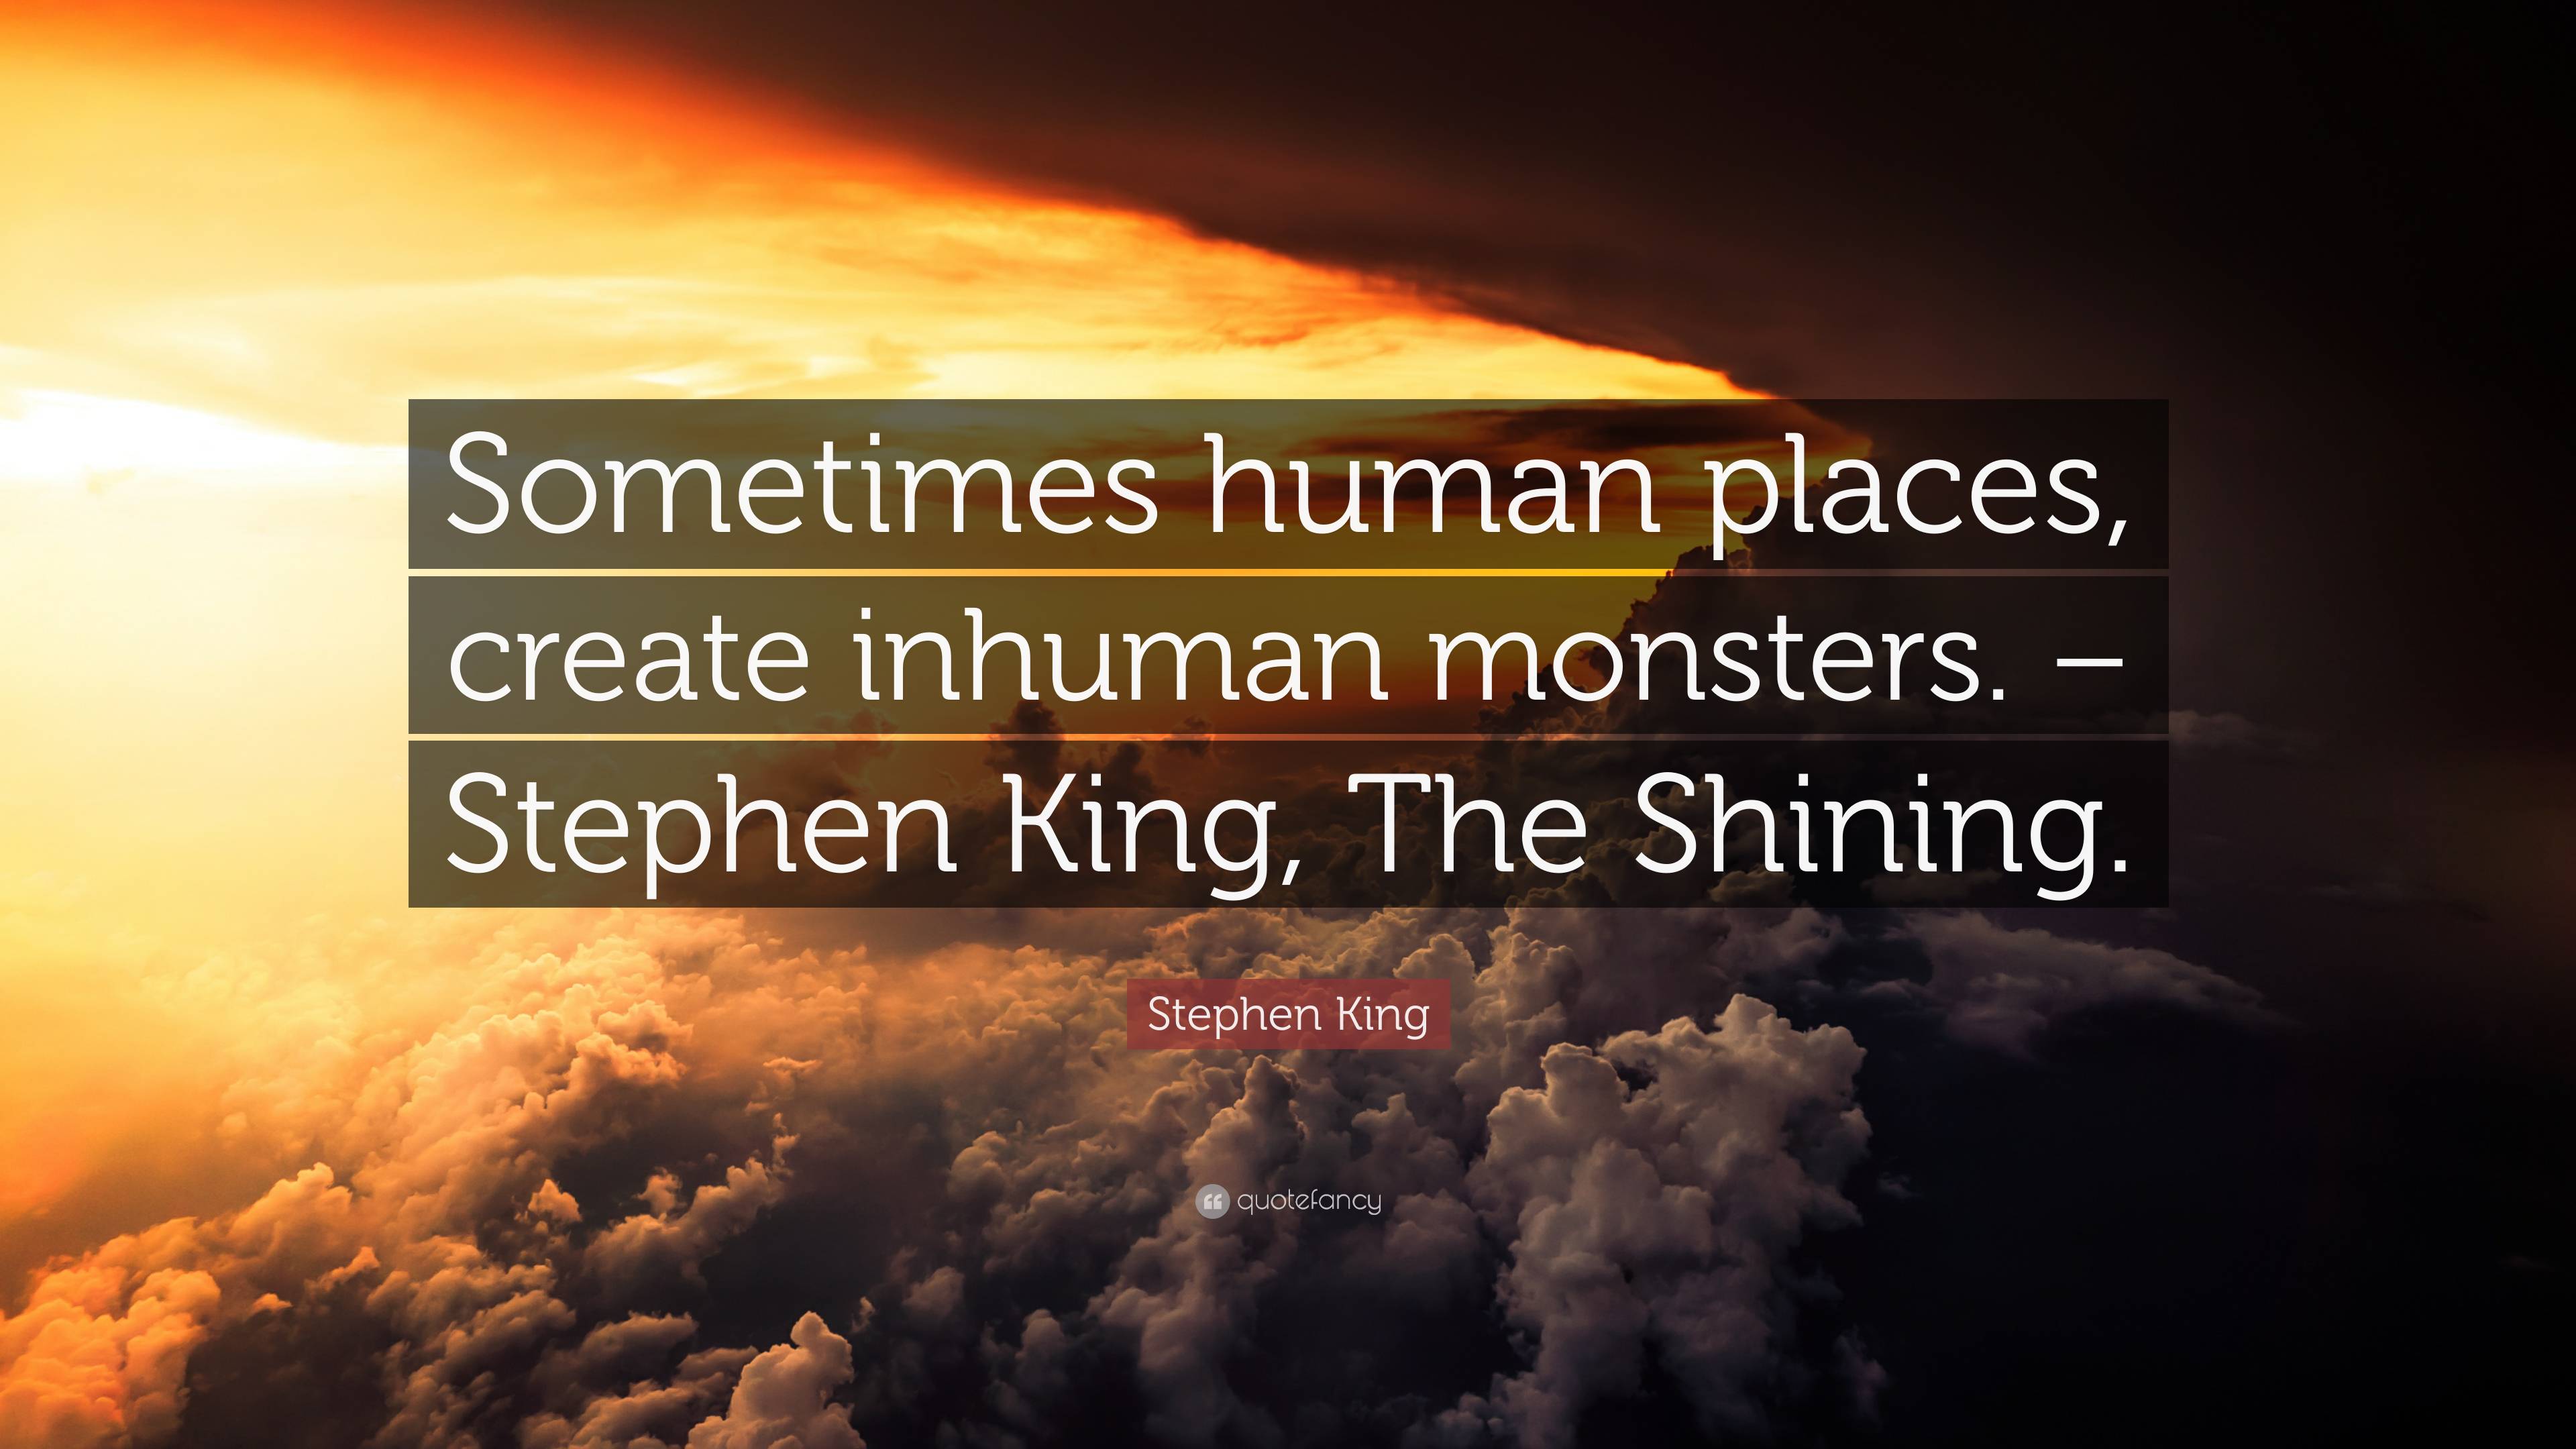 Stephen King's Quotes: Illuminating the Depths of Human Nature